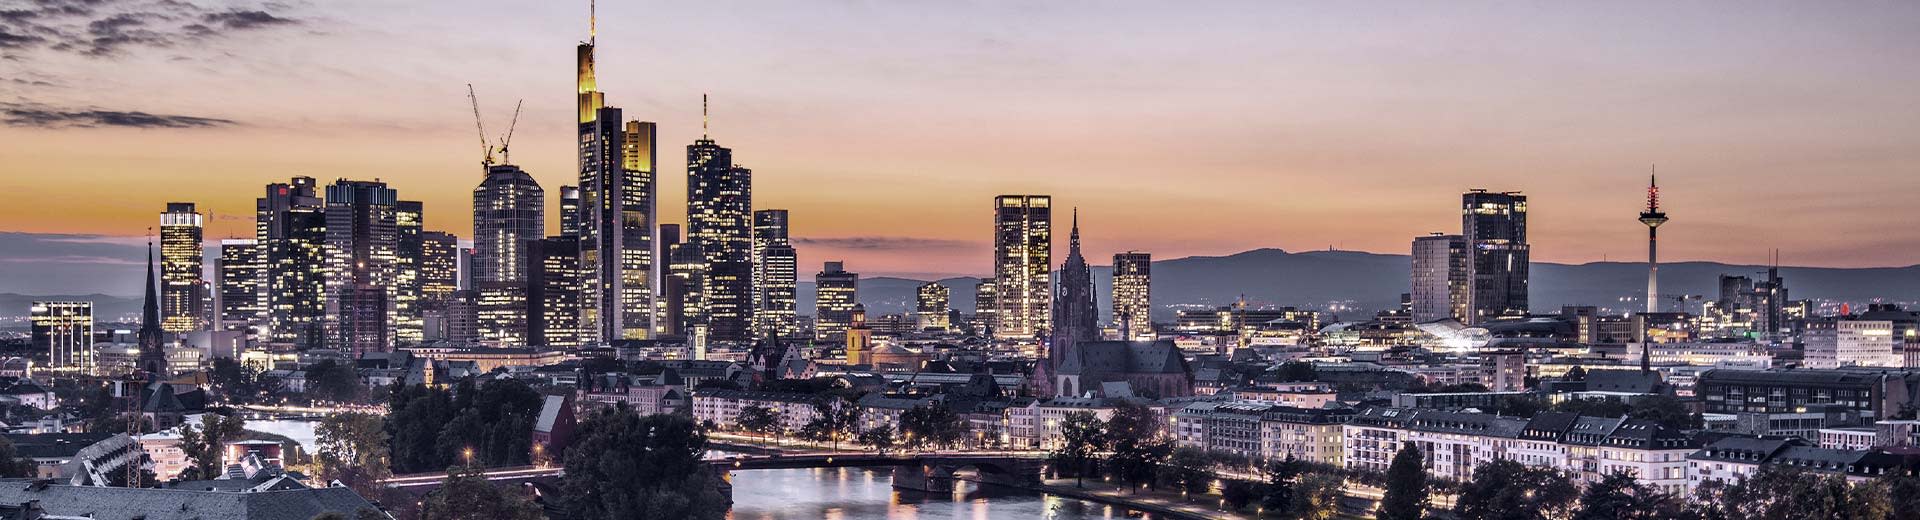 The looming skyscrapers of Frankfurt's financial district at sunset.